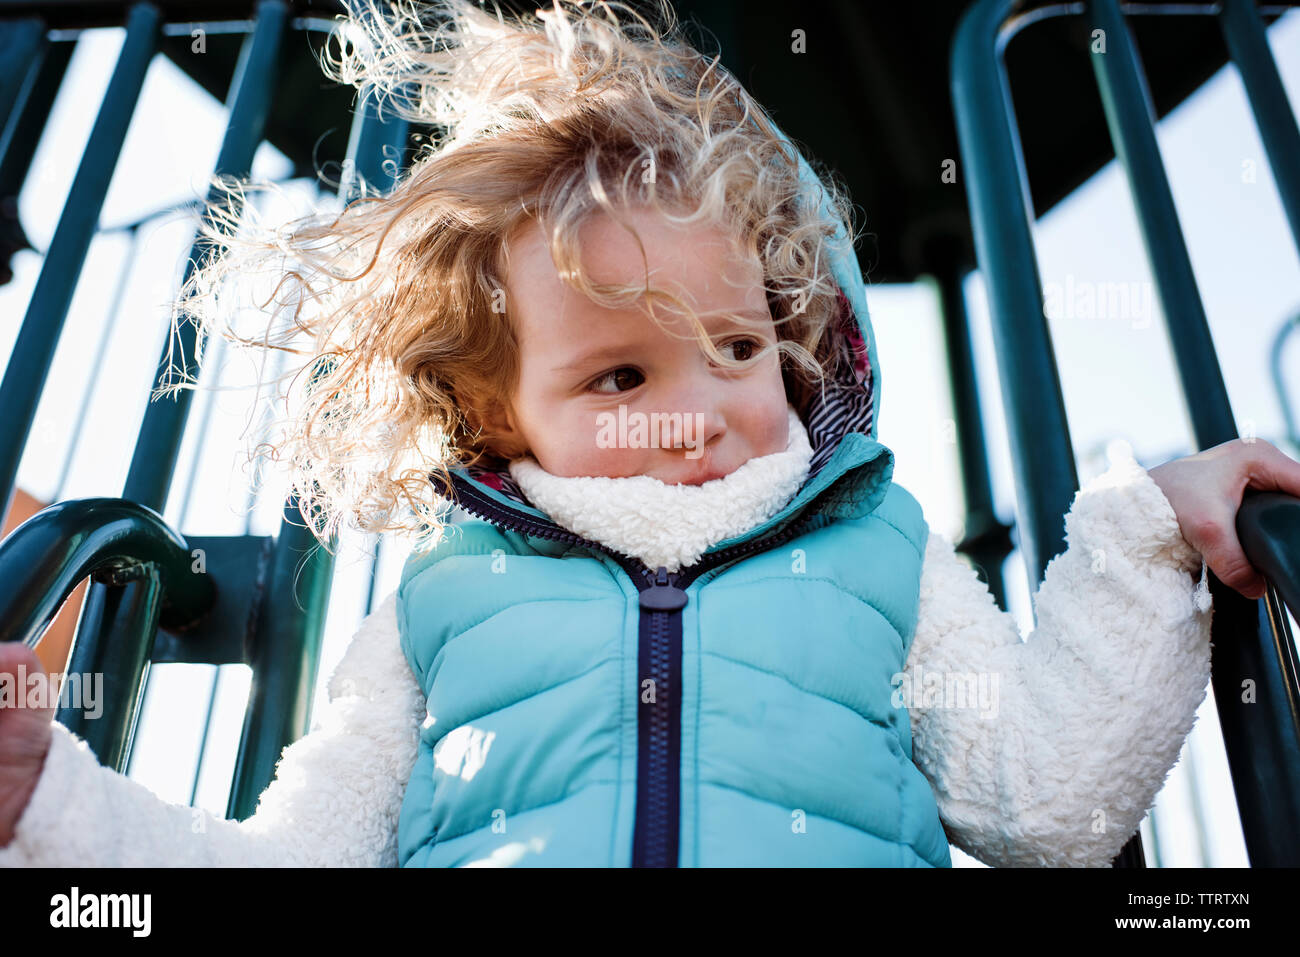 Low angle view of girl playing on slide at playground Stock Photo